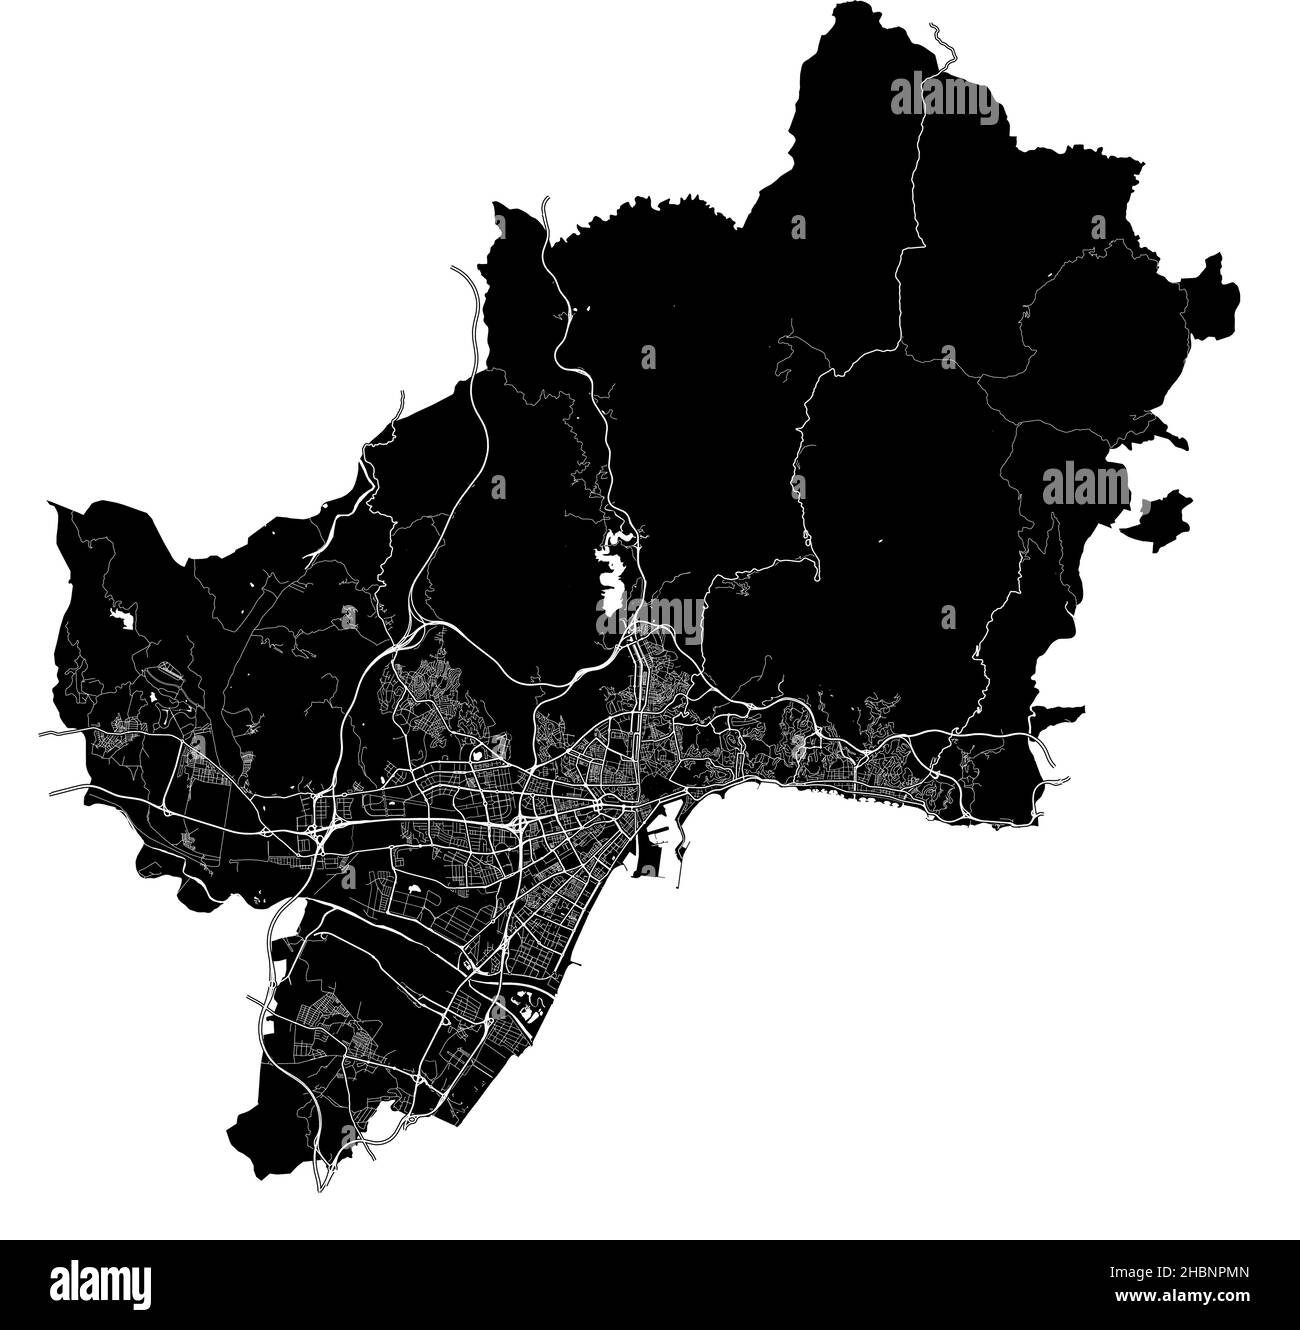 Málaga, Spain, high resolution vector map with city boundaries, and editable paths. The city map was drawn with white areas and lines for main roads, Stock Vector